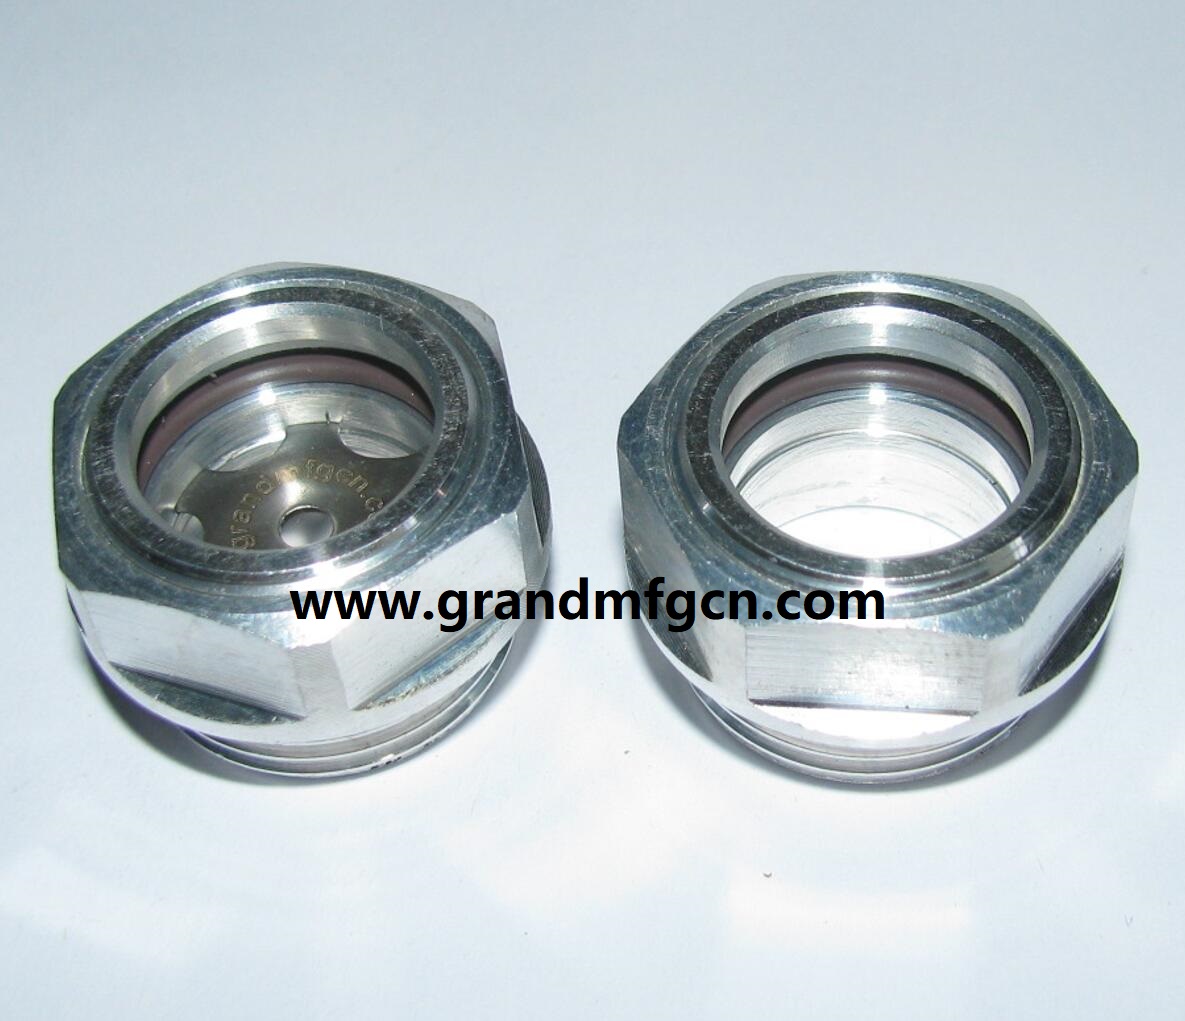 Top quality sight glass supppler from China Grand Hardware Mfg Co.,Ltd